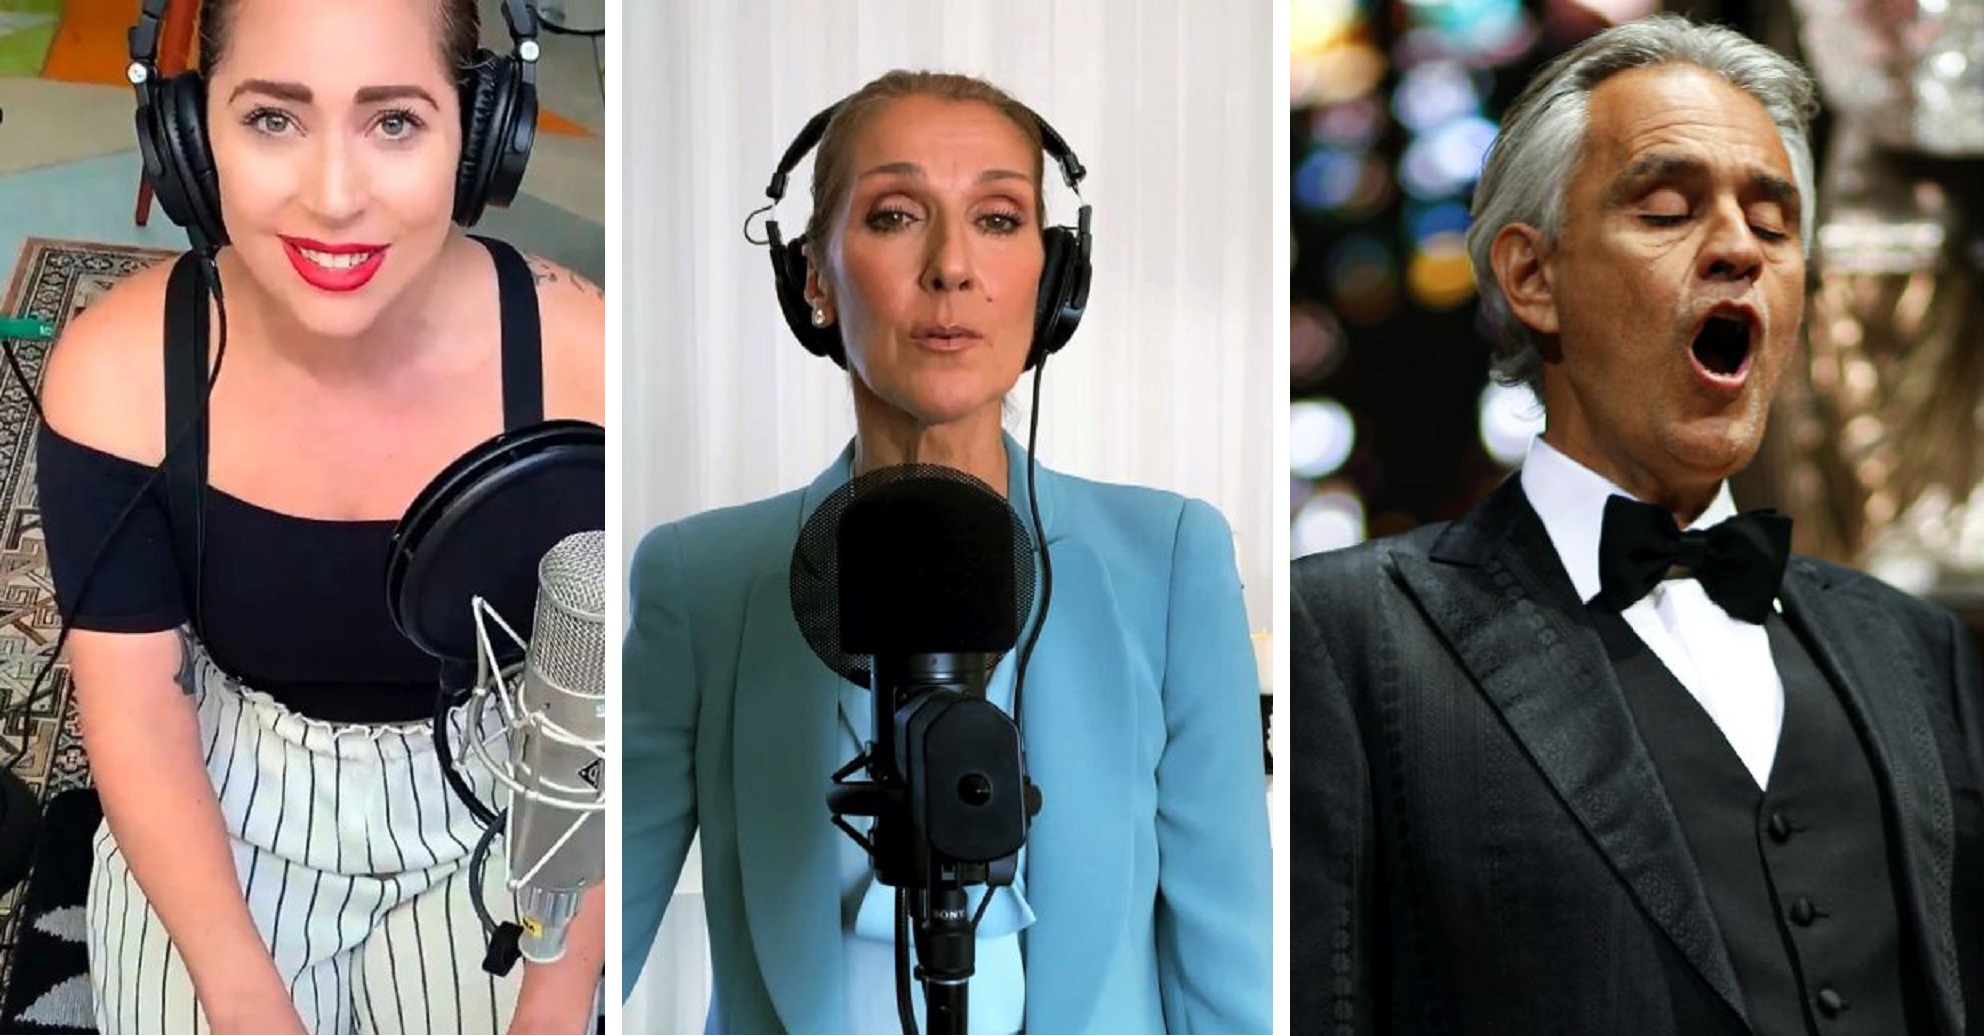 Watch: Celine Dion, Andrea Bocelli, Lady Gaga and More Perform ‘The Prayer’